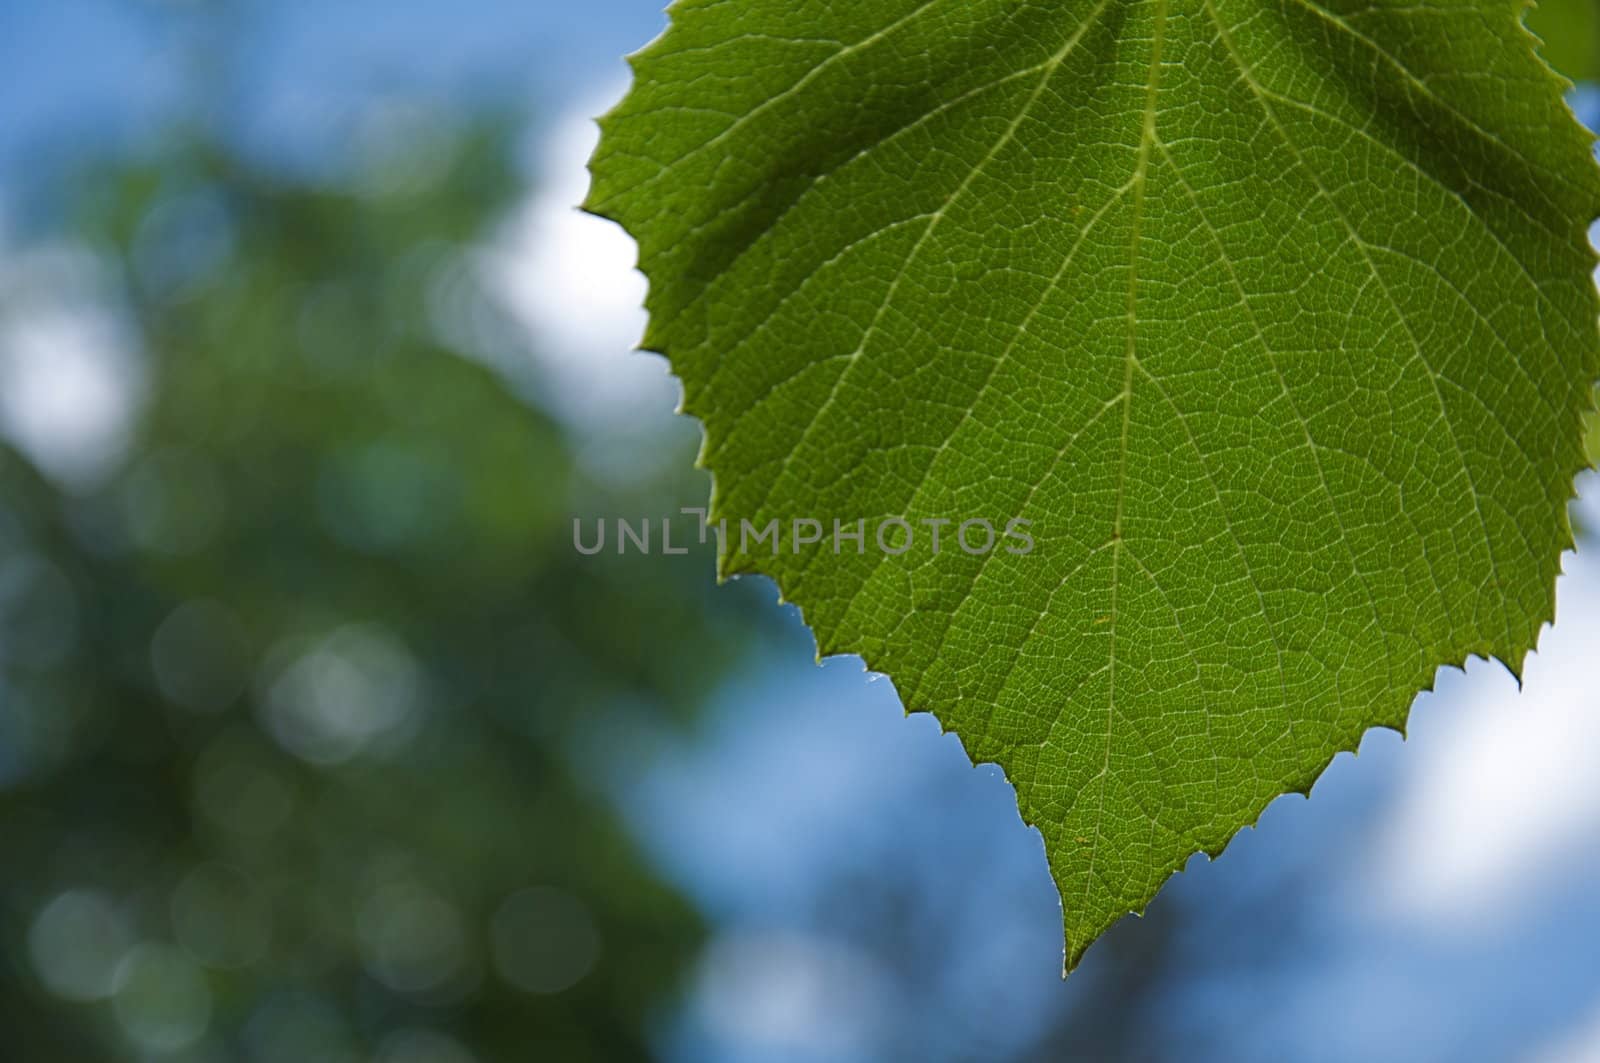 A large, green leaf hangs down in front of a blurred nature background.